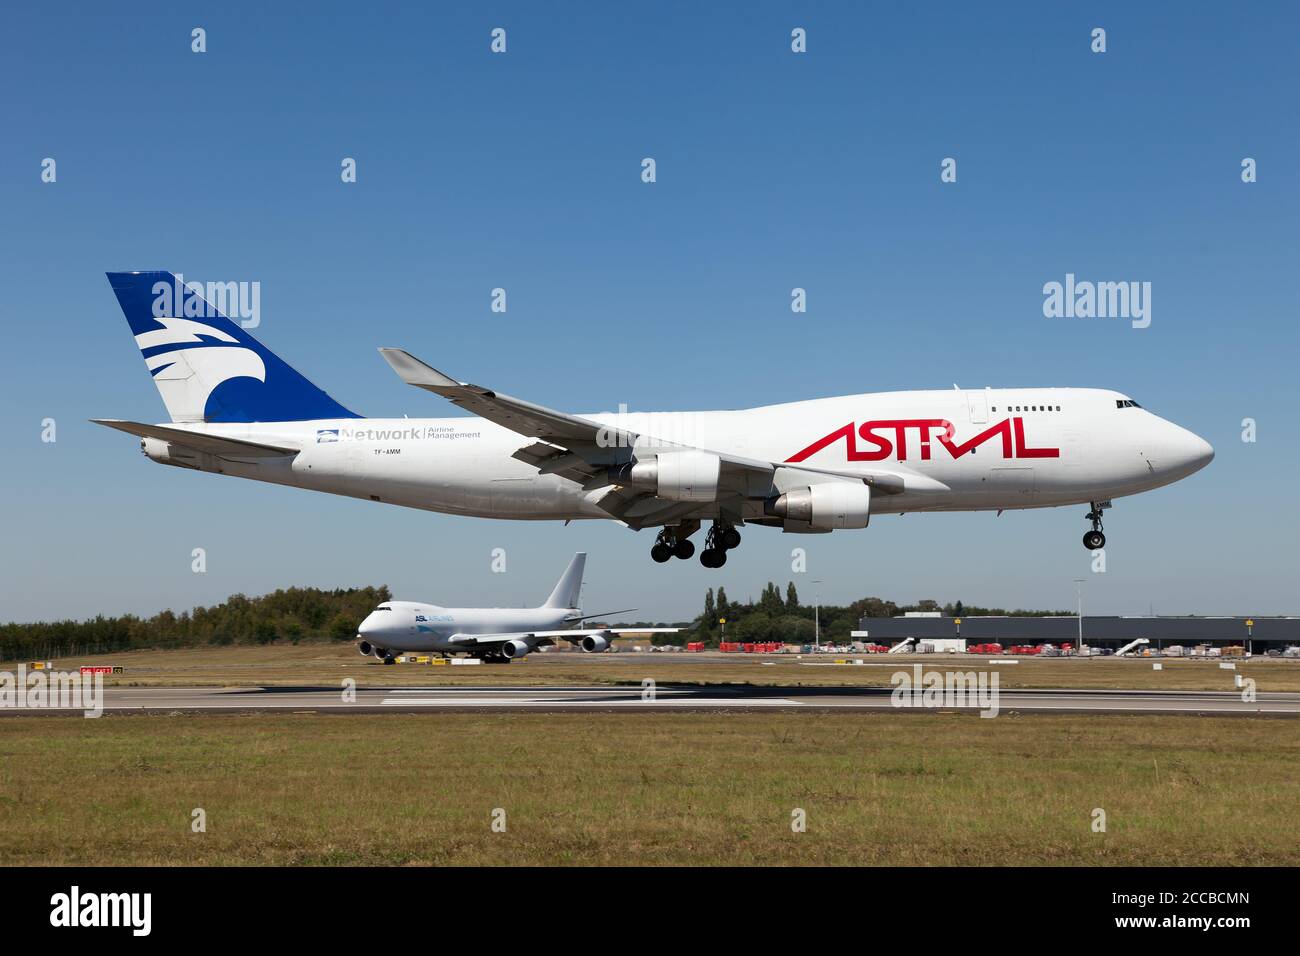 An Astral Aviation (Air Atlanta Icelandic) Boeing 747-400 BDSF (passenger to freighter converted) about to touch the ground at Liege Bierset airport. Stock Photo